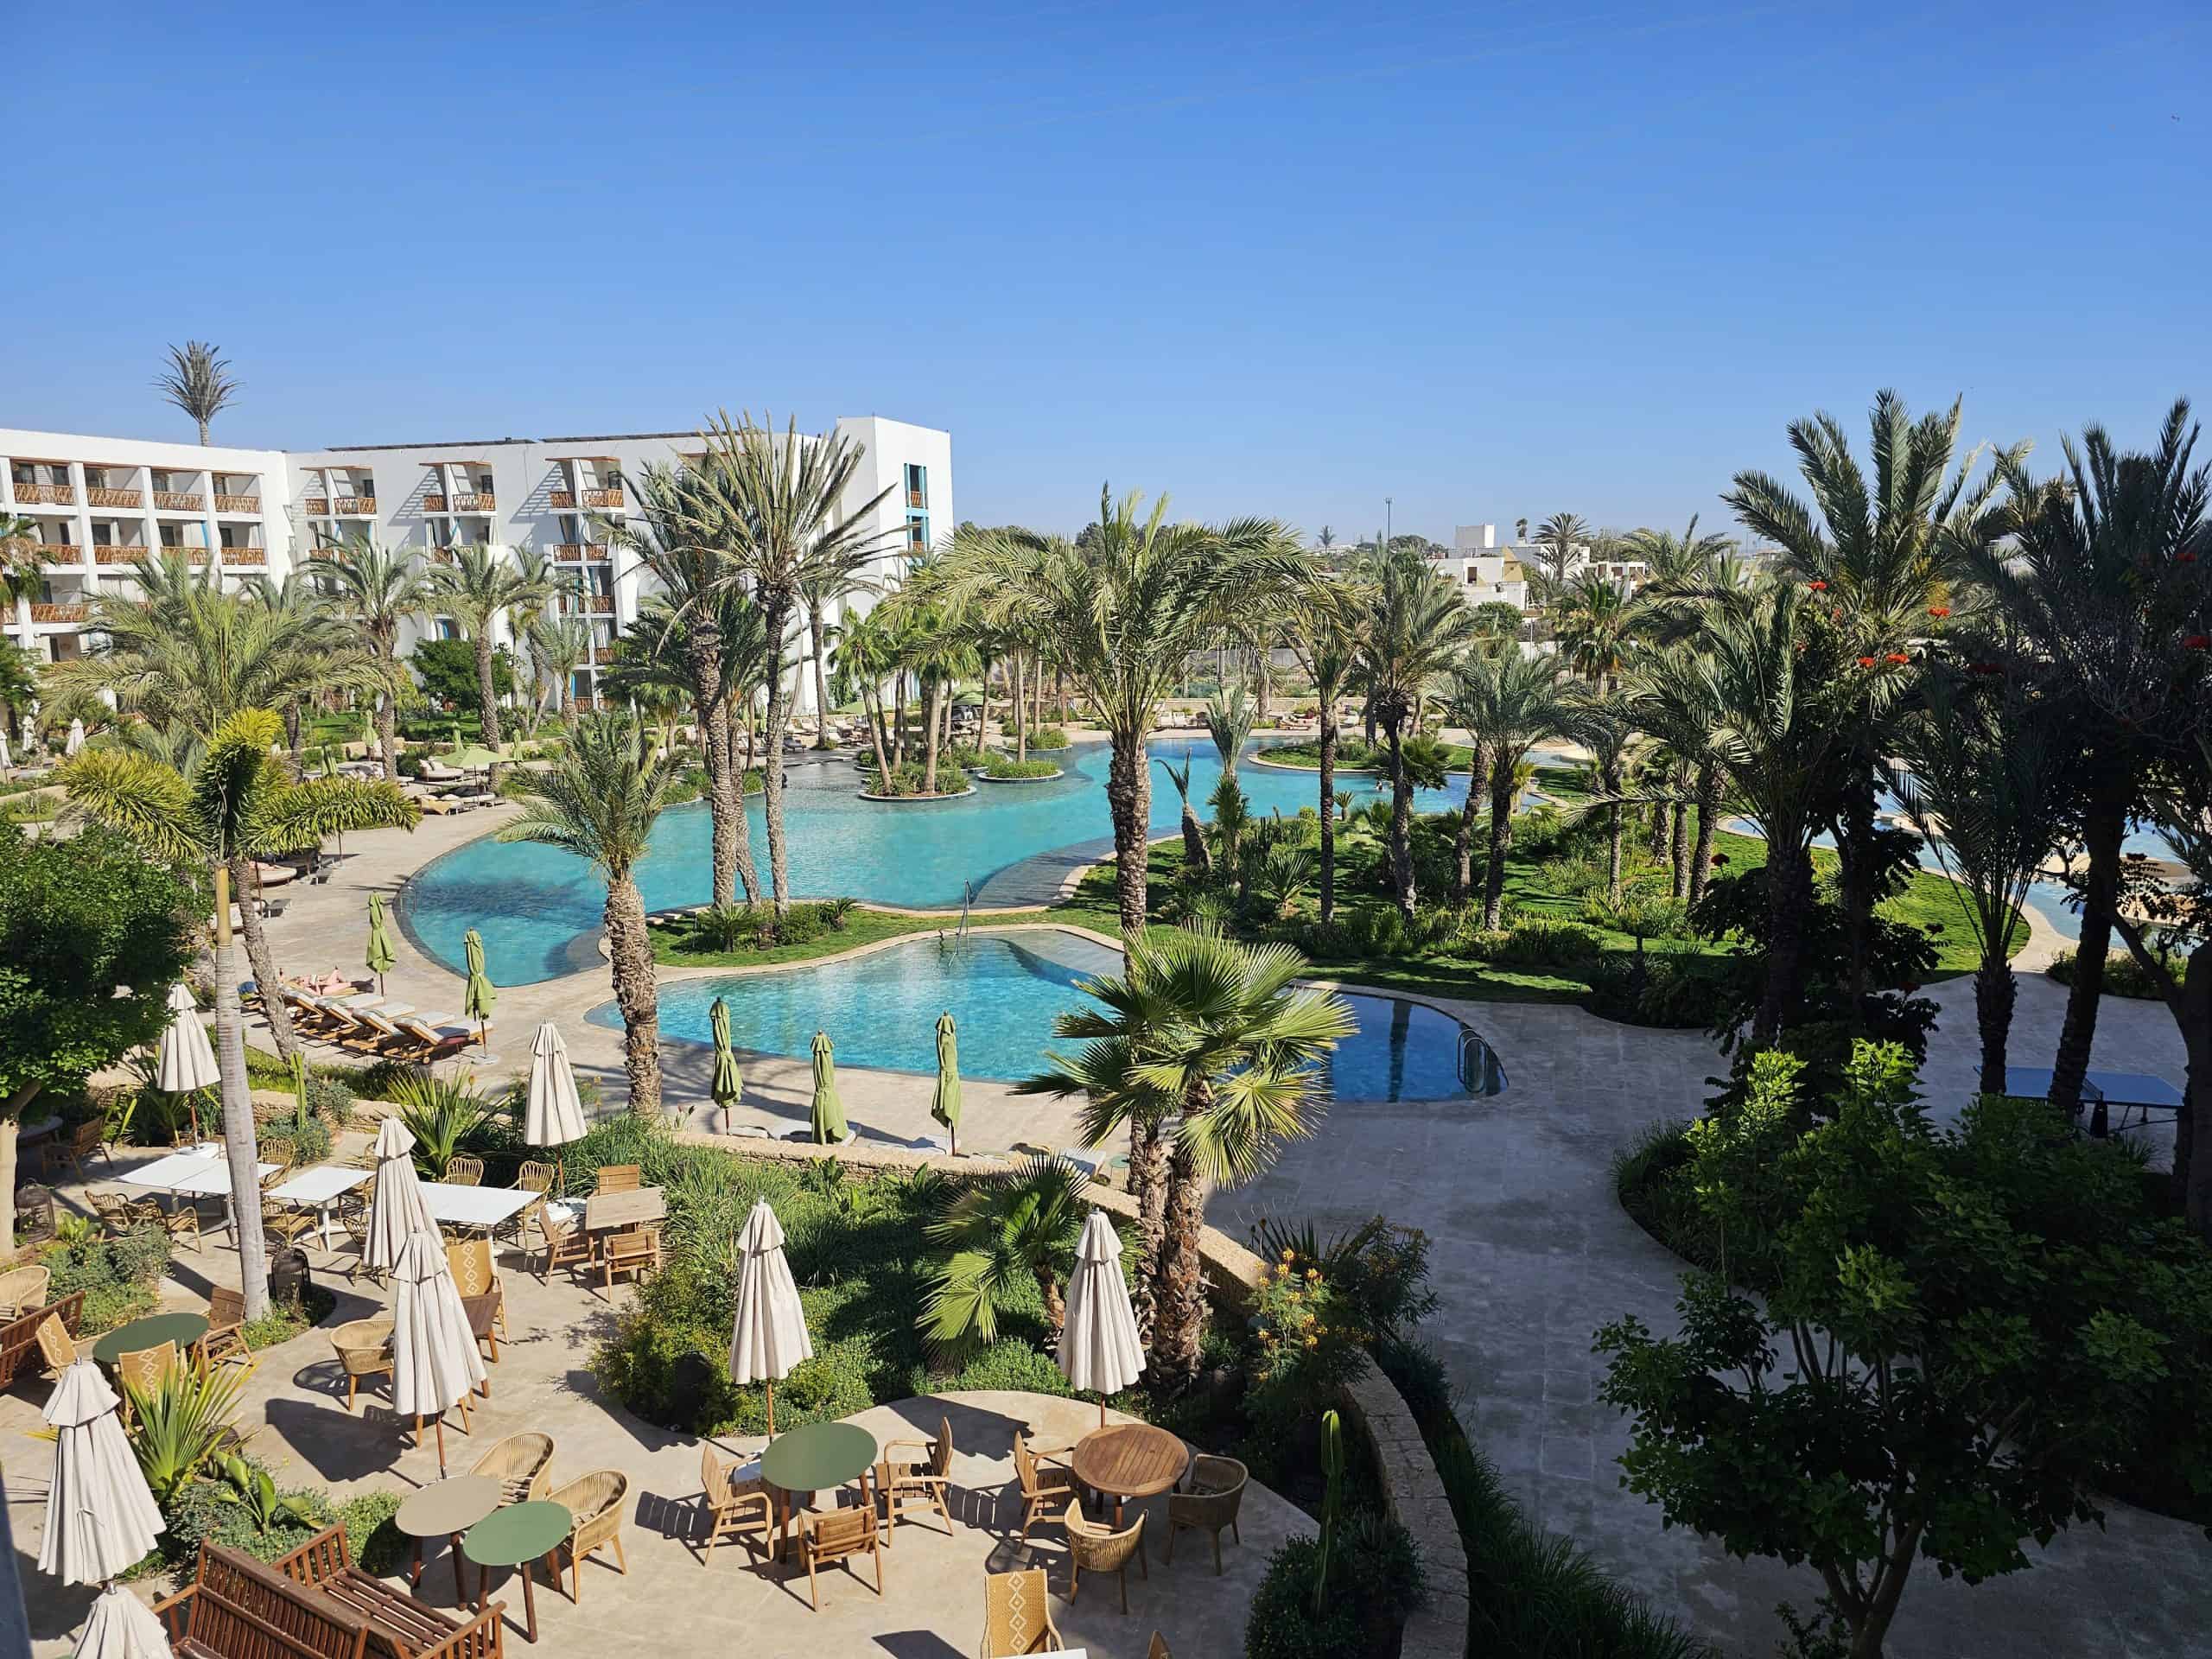 Hotel review: The View, Agadir